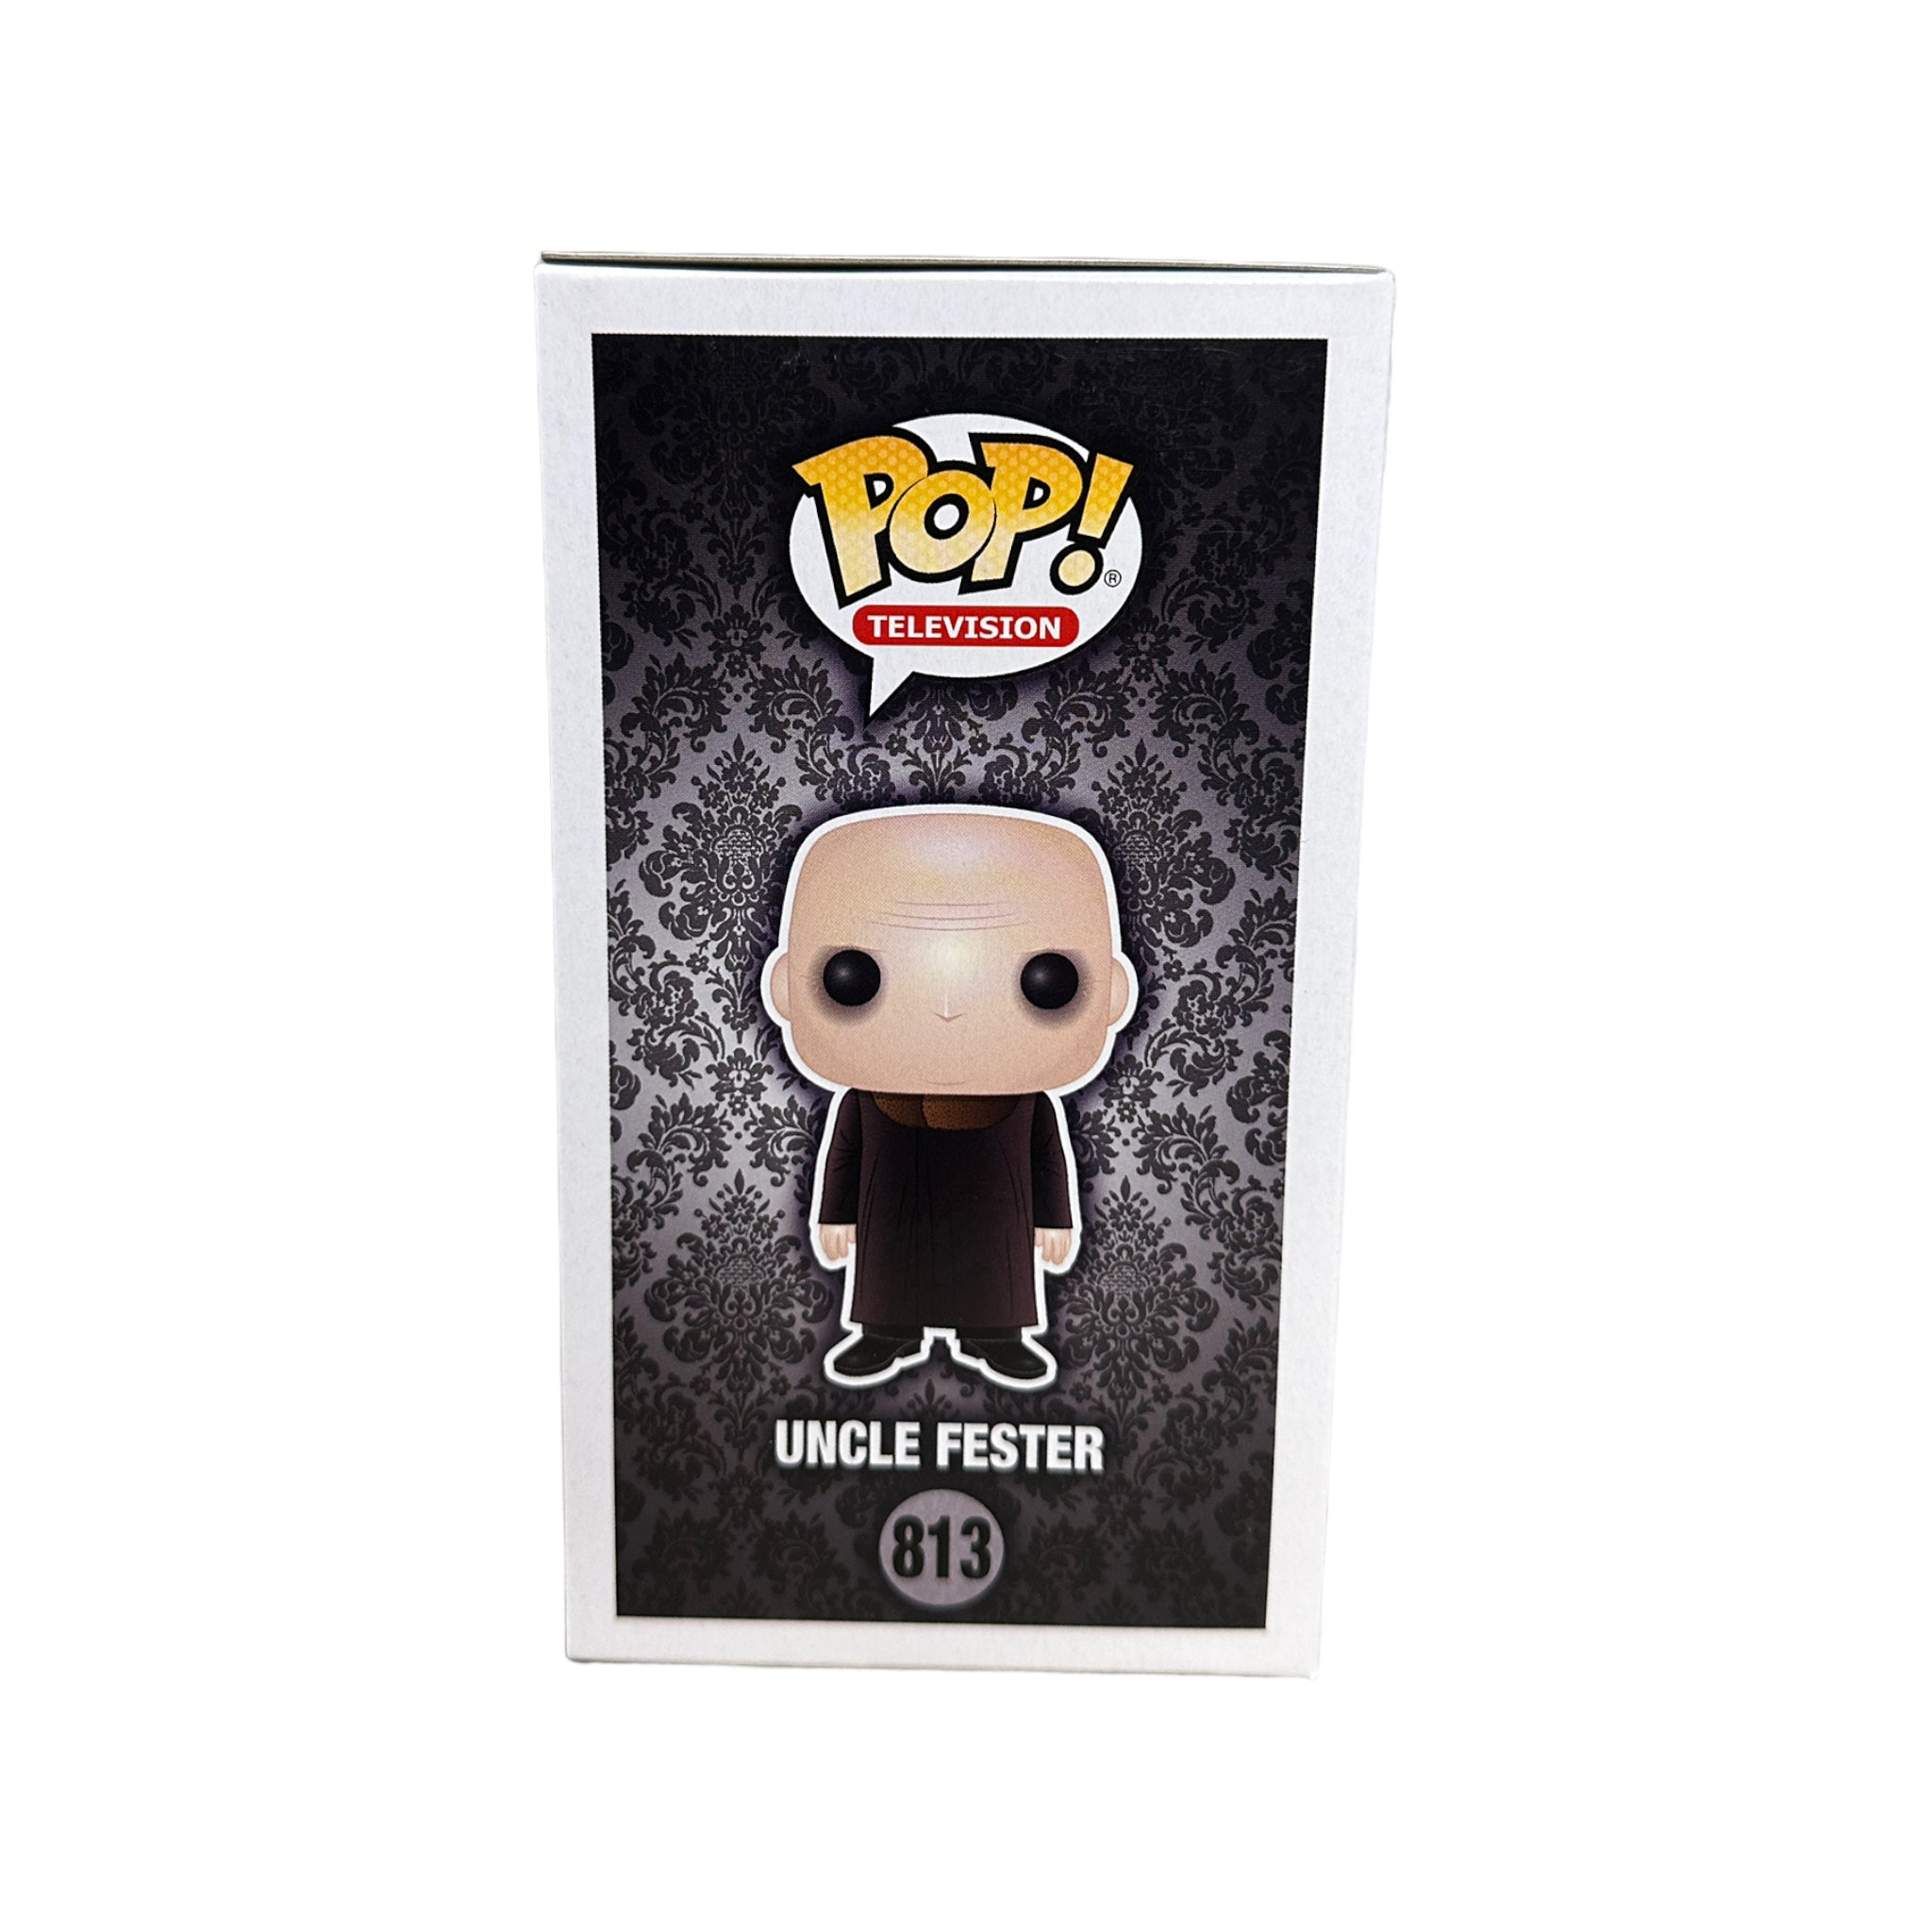 Uncle Fester #813 Funko Pop! - The Addams Family - 2019 Pop! - Condition 8.75/10